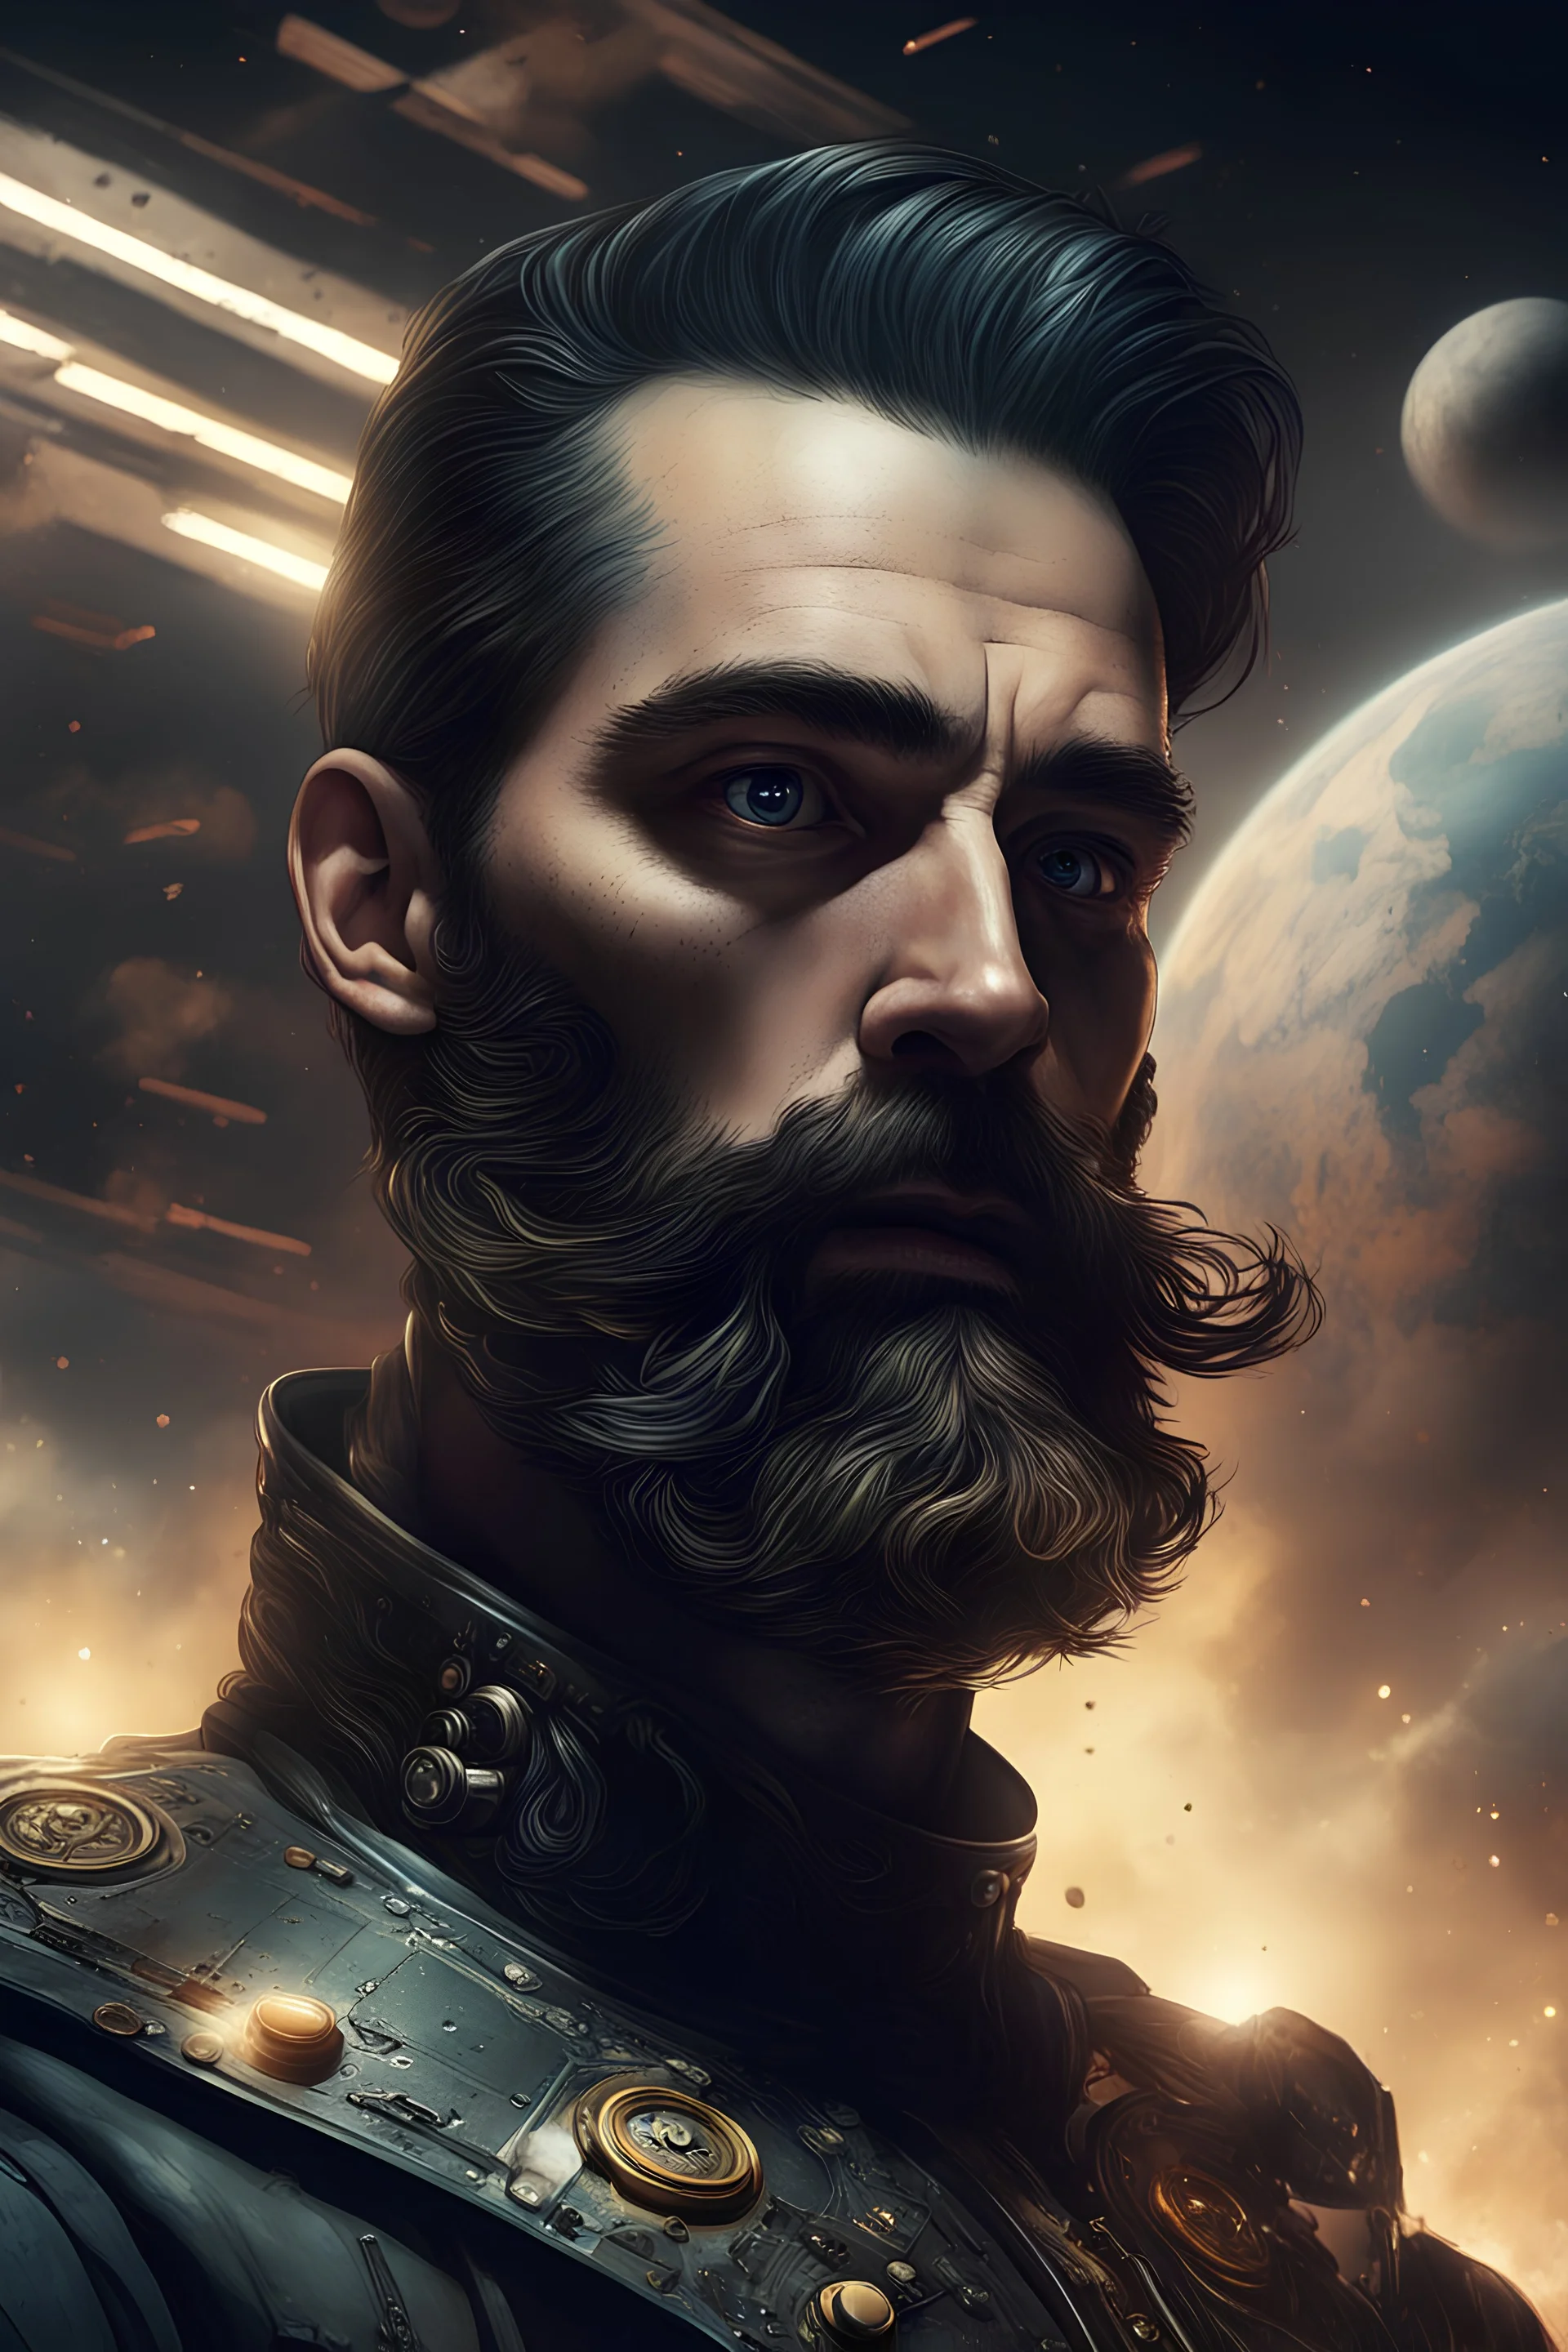 Beard Duke Leto Atreides dead with the Vgas pill in the Mouth and spite the Gas in the room with Harkonnens and Mentat Piter De Vries , Alexandro Jodorowsy Art,Juan Gimenez Art,Space Art,Sci-Fic Art,Dark Influence,NijiExpress 3D v2,Kinetic Art,Datanoshing,Oil painting,Ink v3,Splash style,Abstract Art,Abstract Tech,CyberTech Elements,Futuristic,Epic style,Illustrated v3,Deco Influence,Air Brush style,drawing